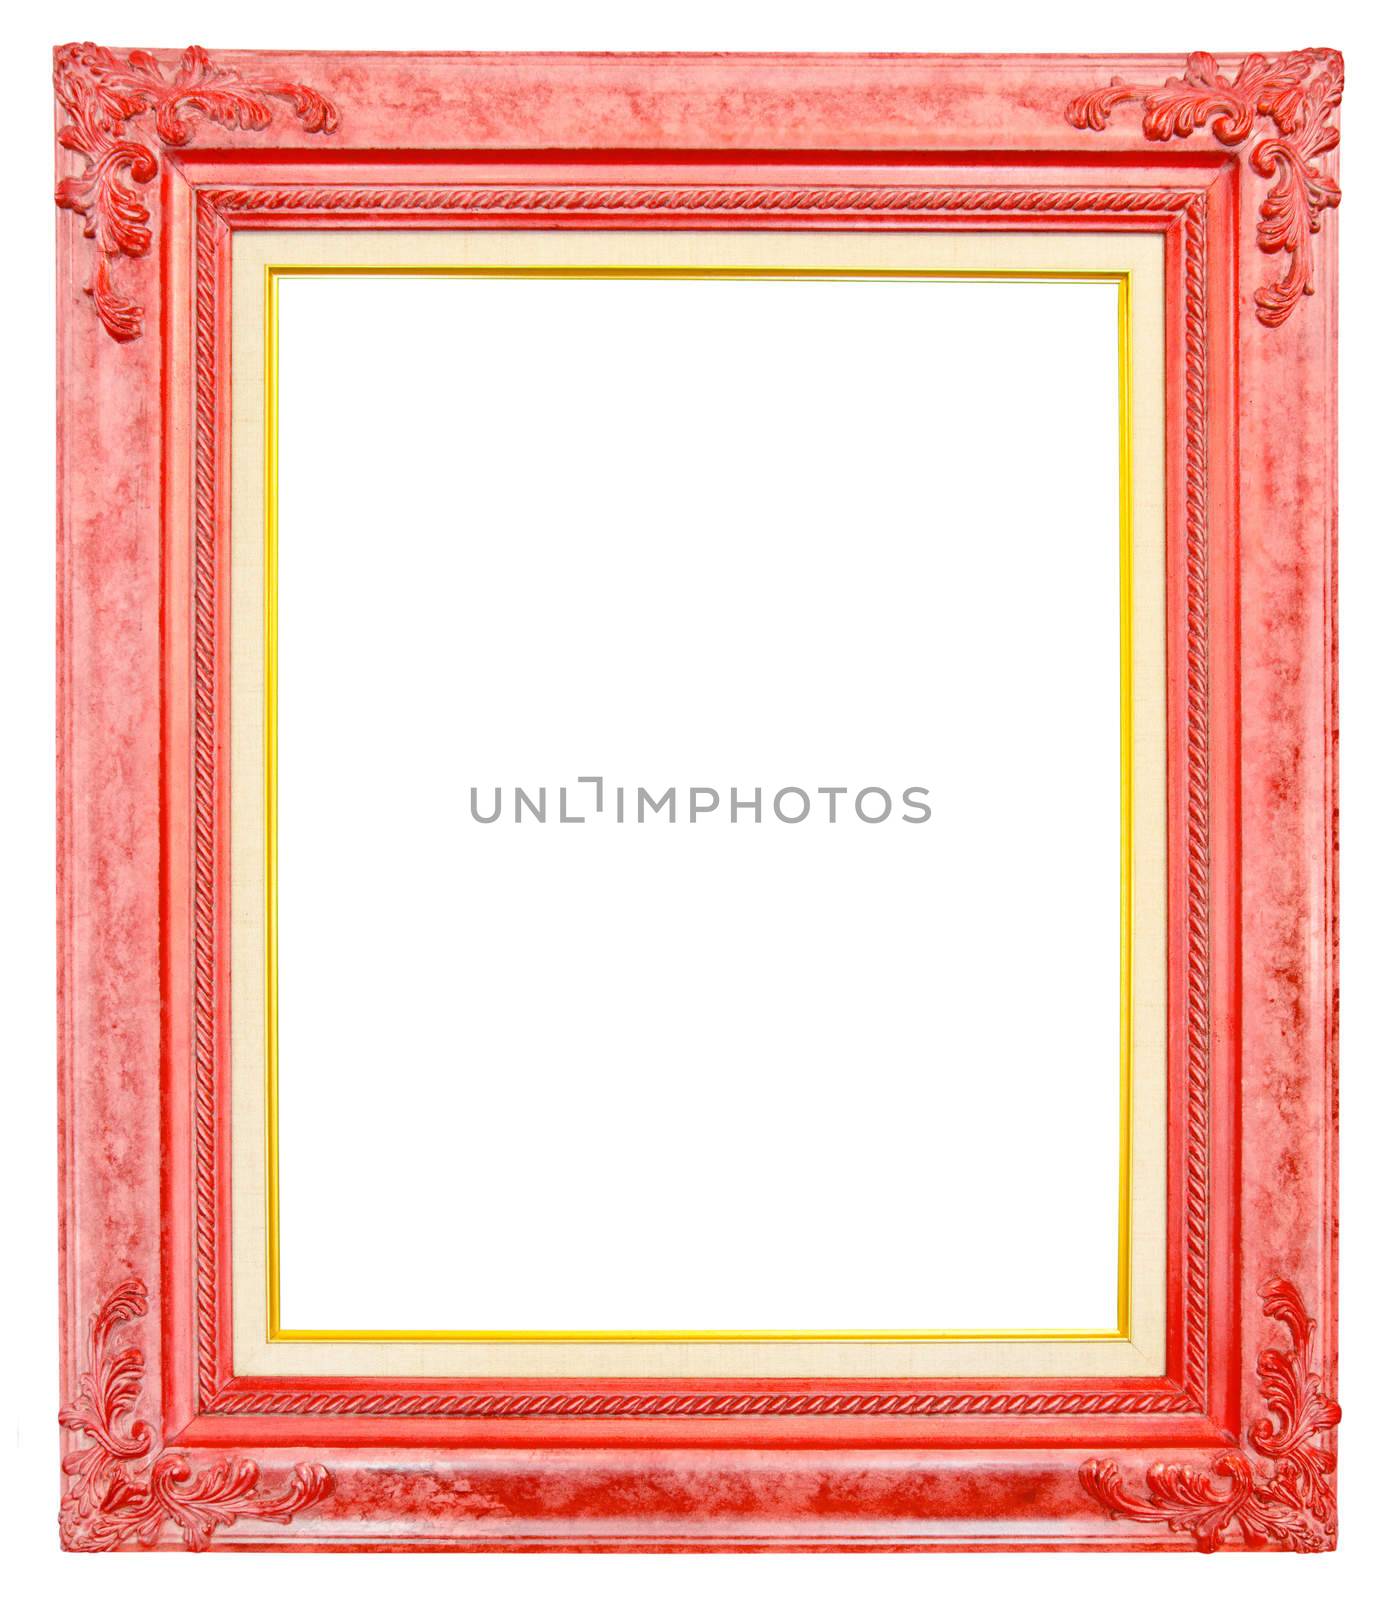 antique red frame isolated on white background, clipping path